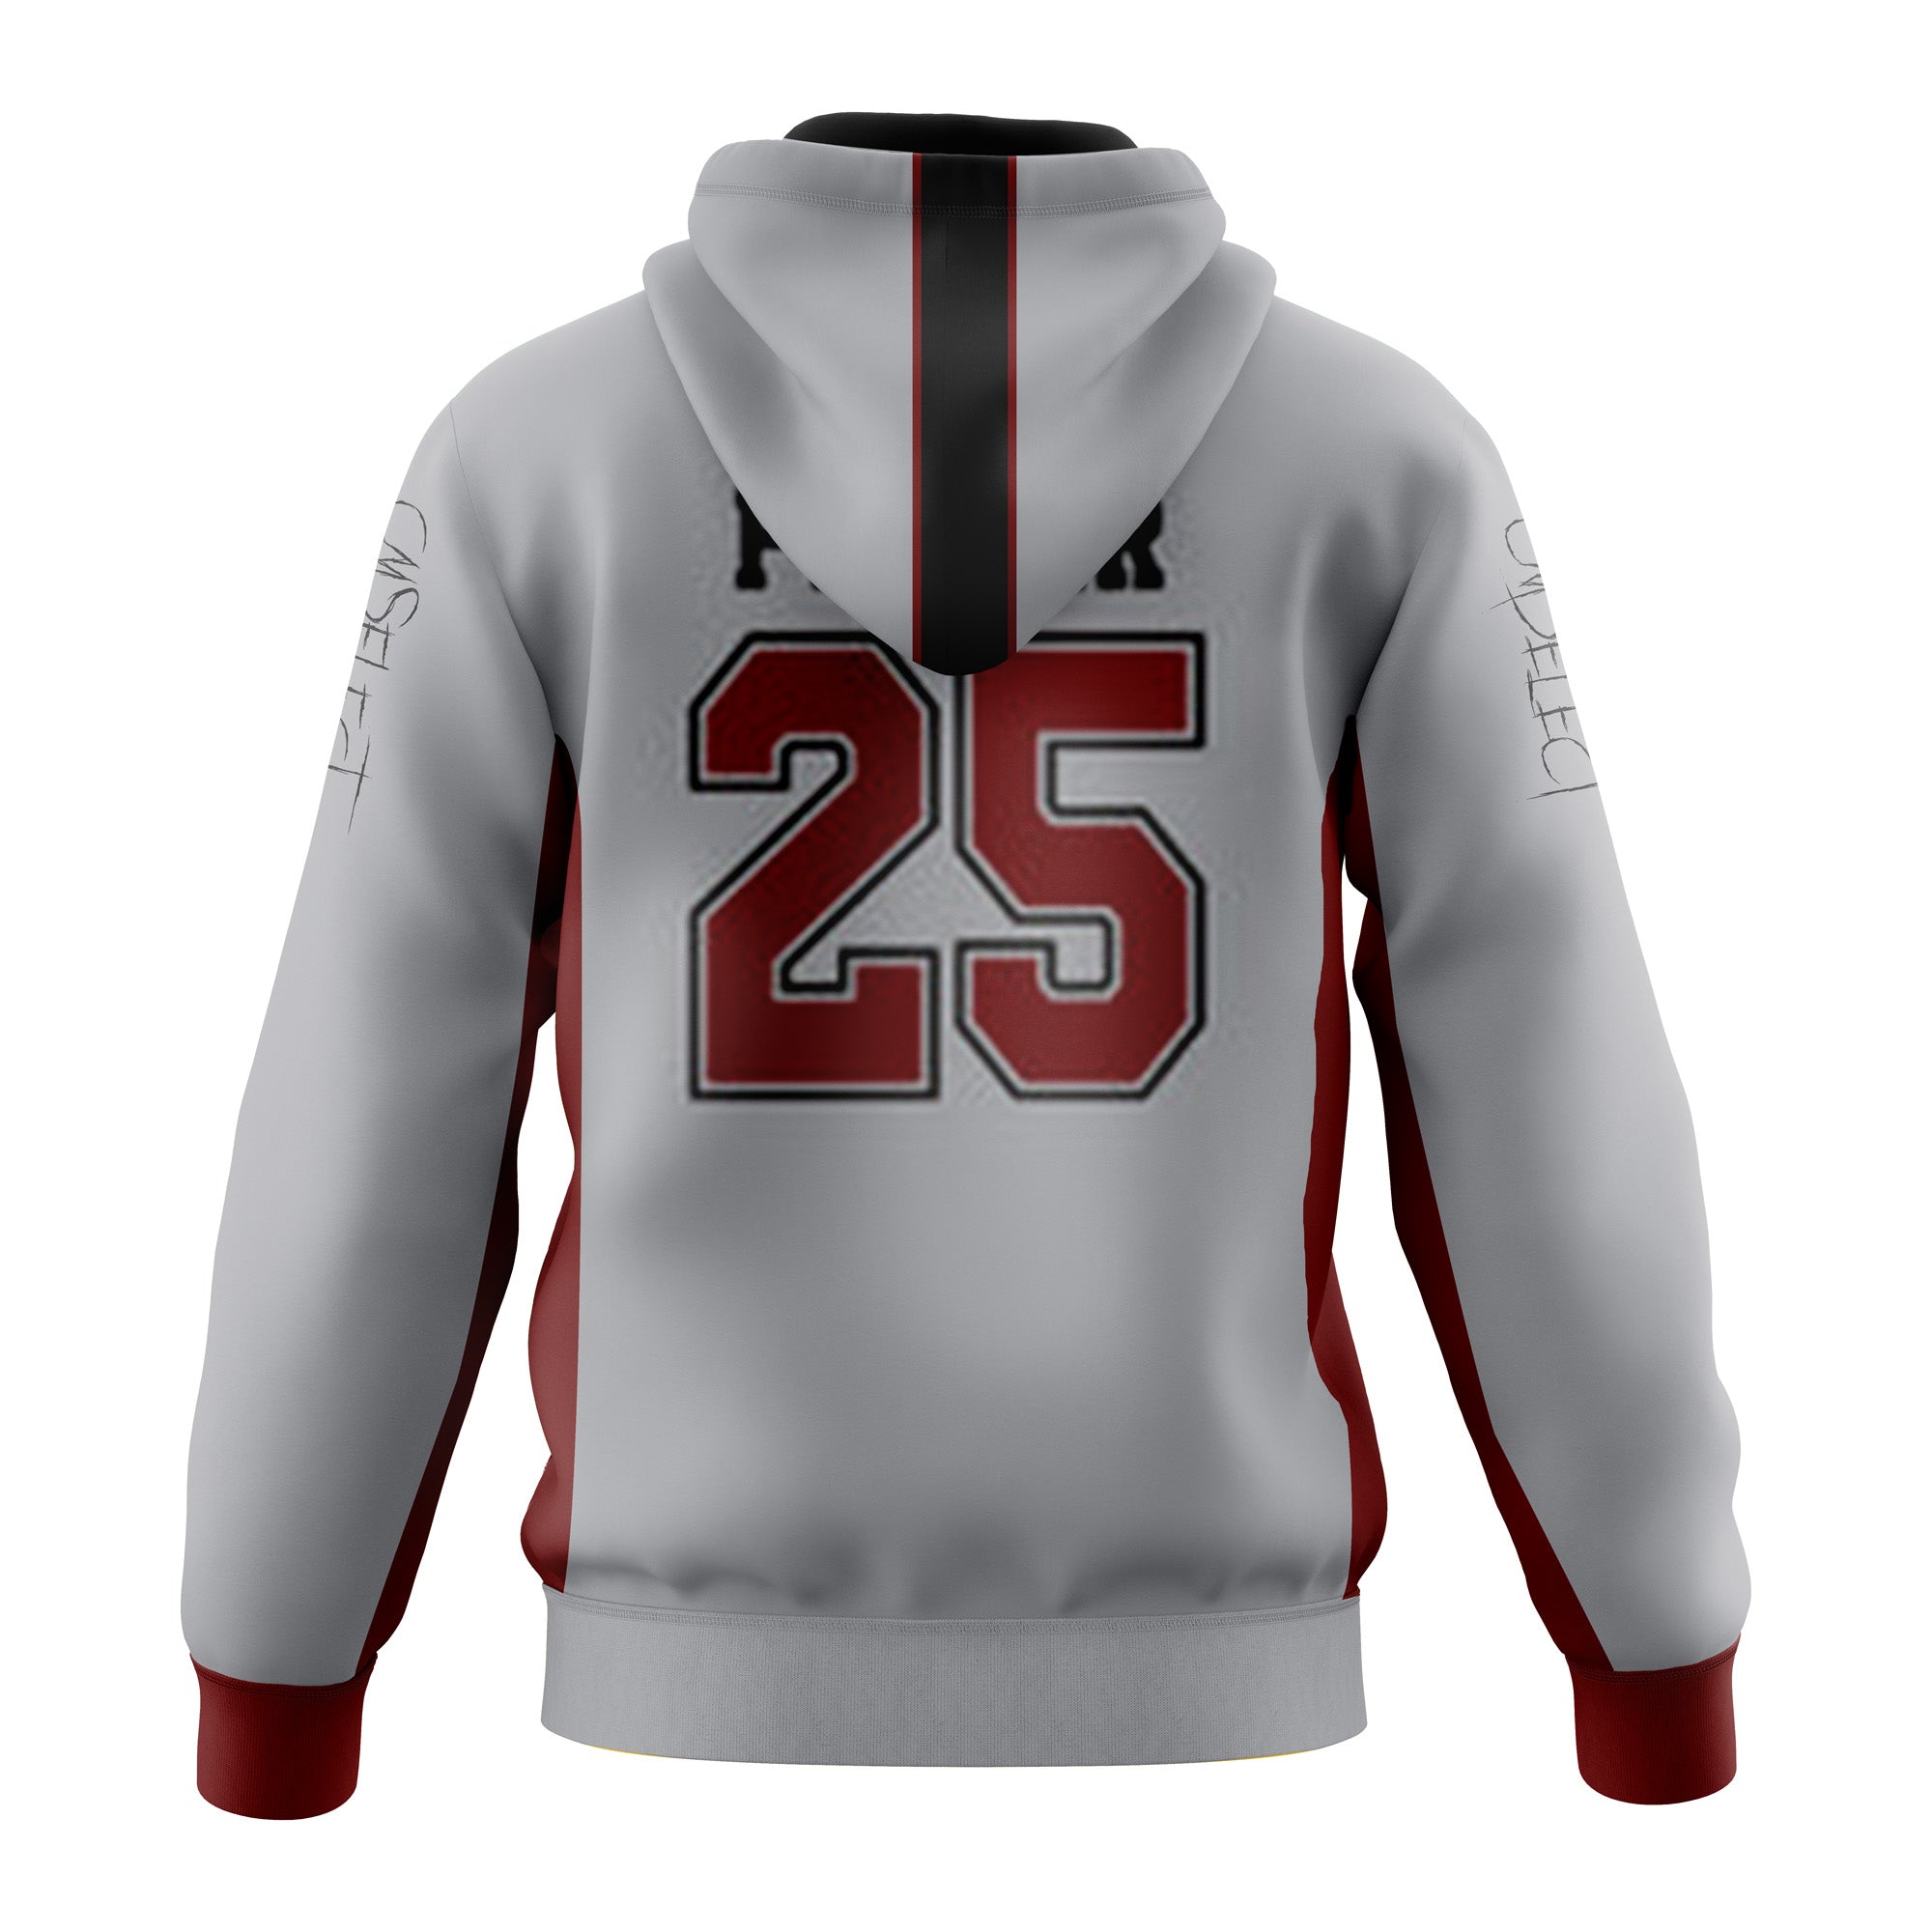 CM SELECT ROCKHOPPERS Football Sublimated Hoodie (Grey)